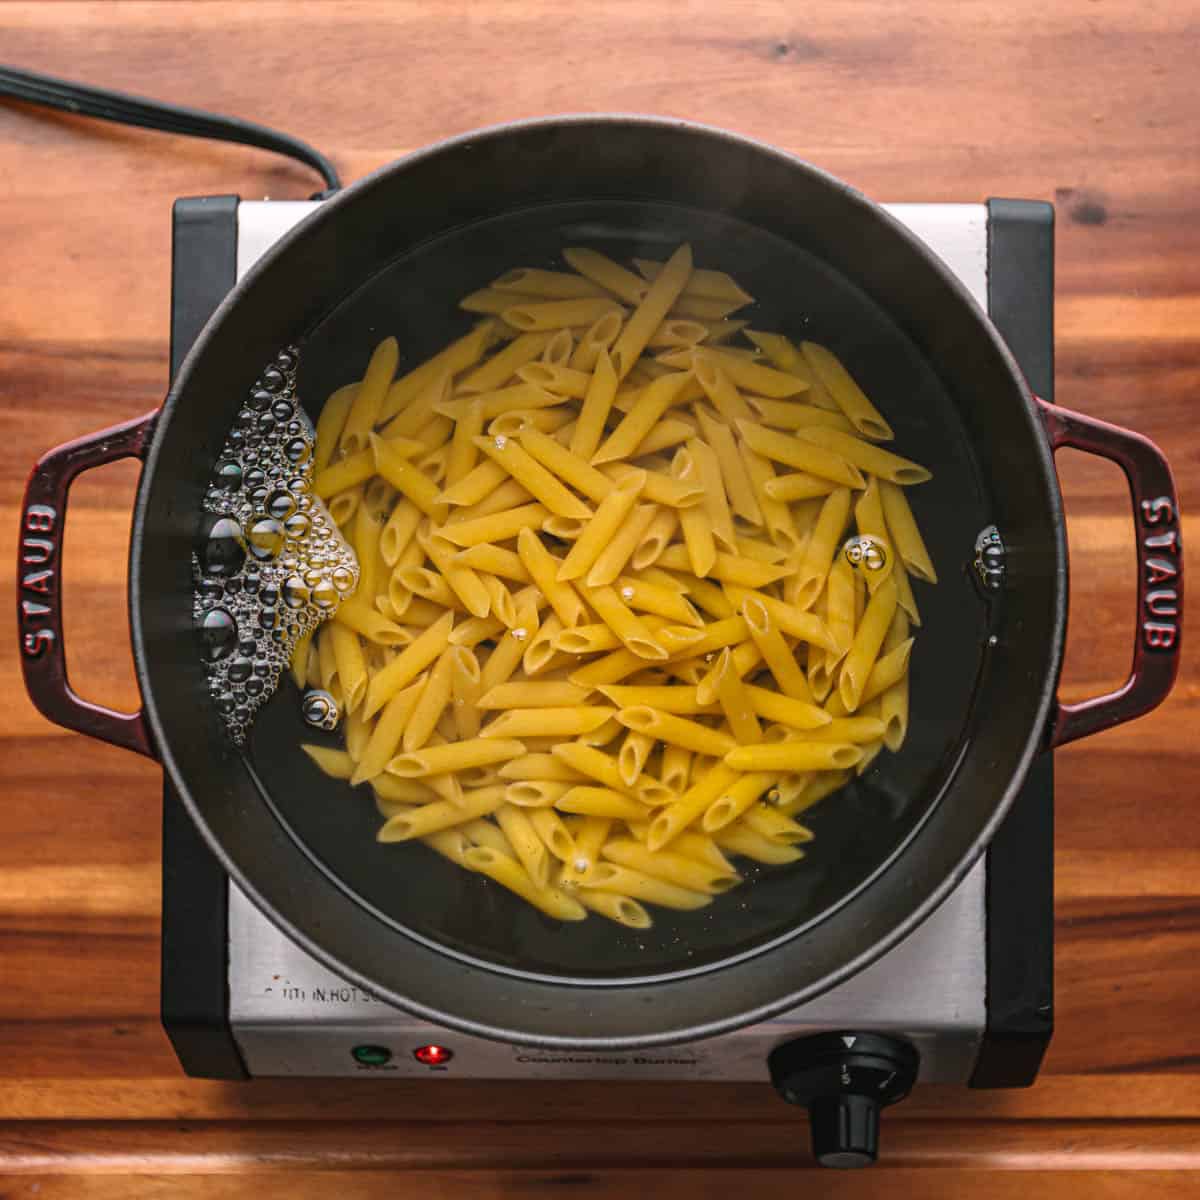 Bring a large pot of water to a boil, then season it with salt. Cook the penne until it's one minute away from being al dente. Reserve at least ¼ cup of pasta water for later.